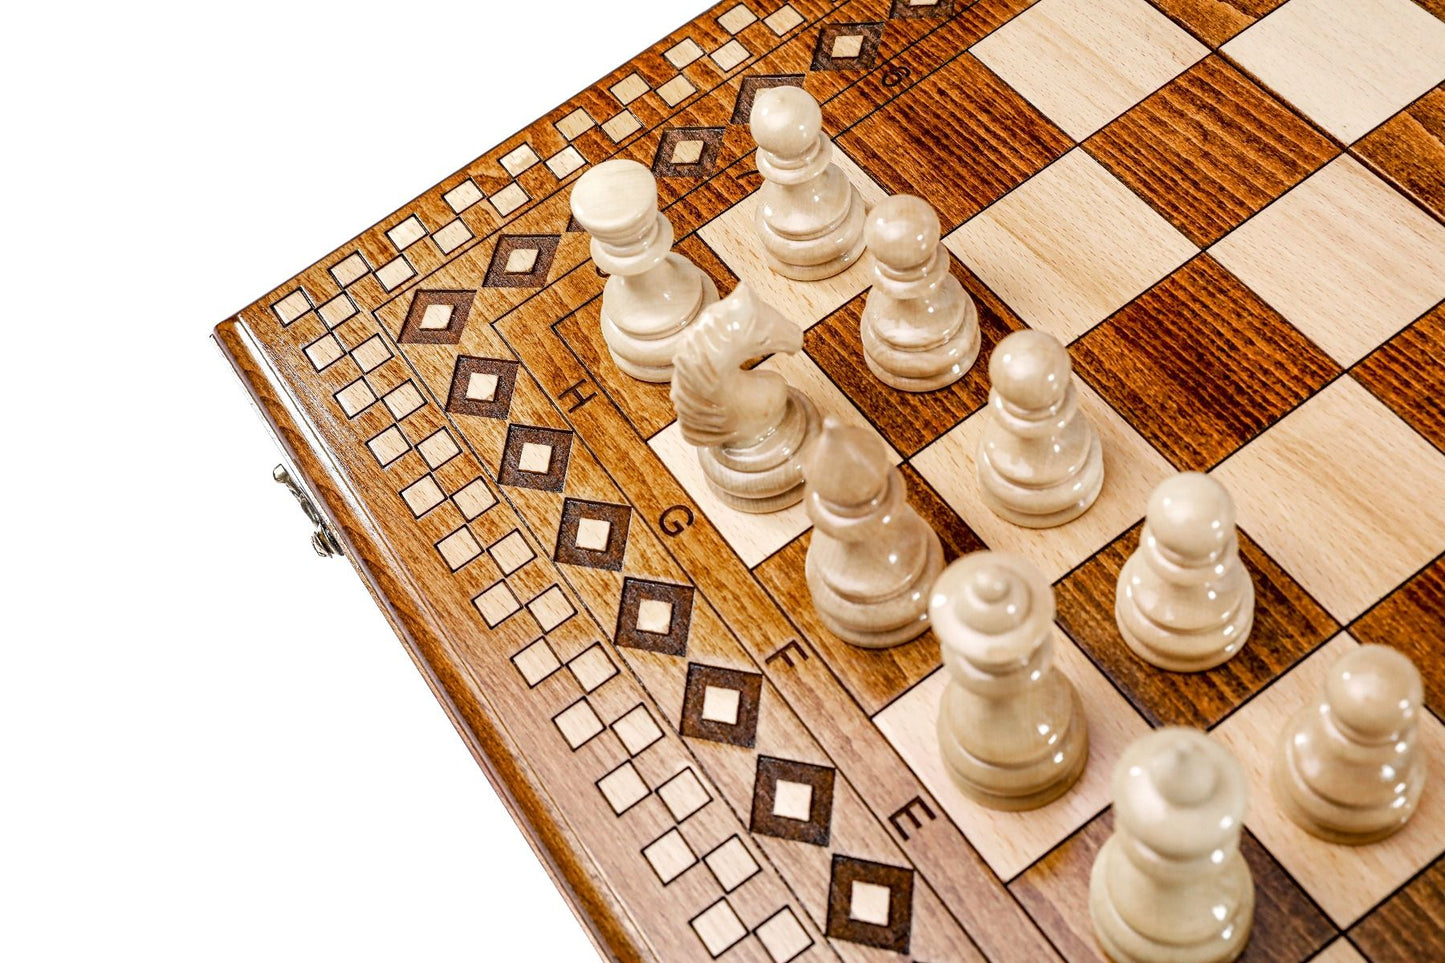 Let each match unfold with the Armenian Carpet Pattern Wooden Chess Set, where strategy and art converge in a celebration of heritage and craftsmanship.